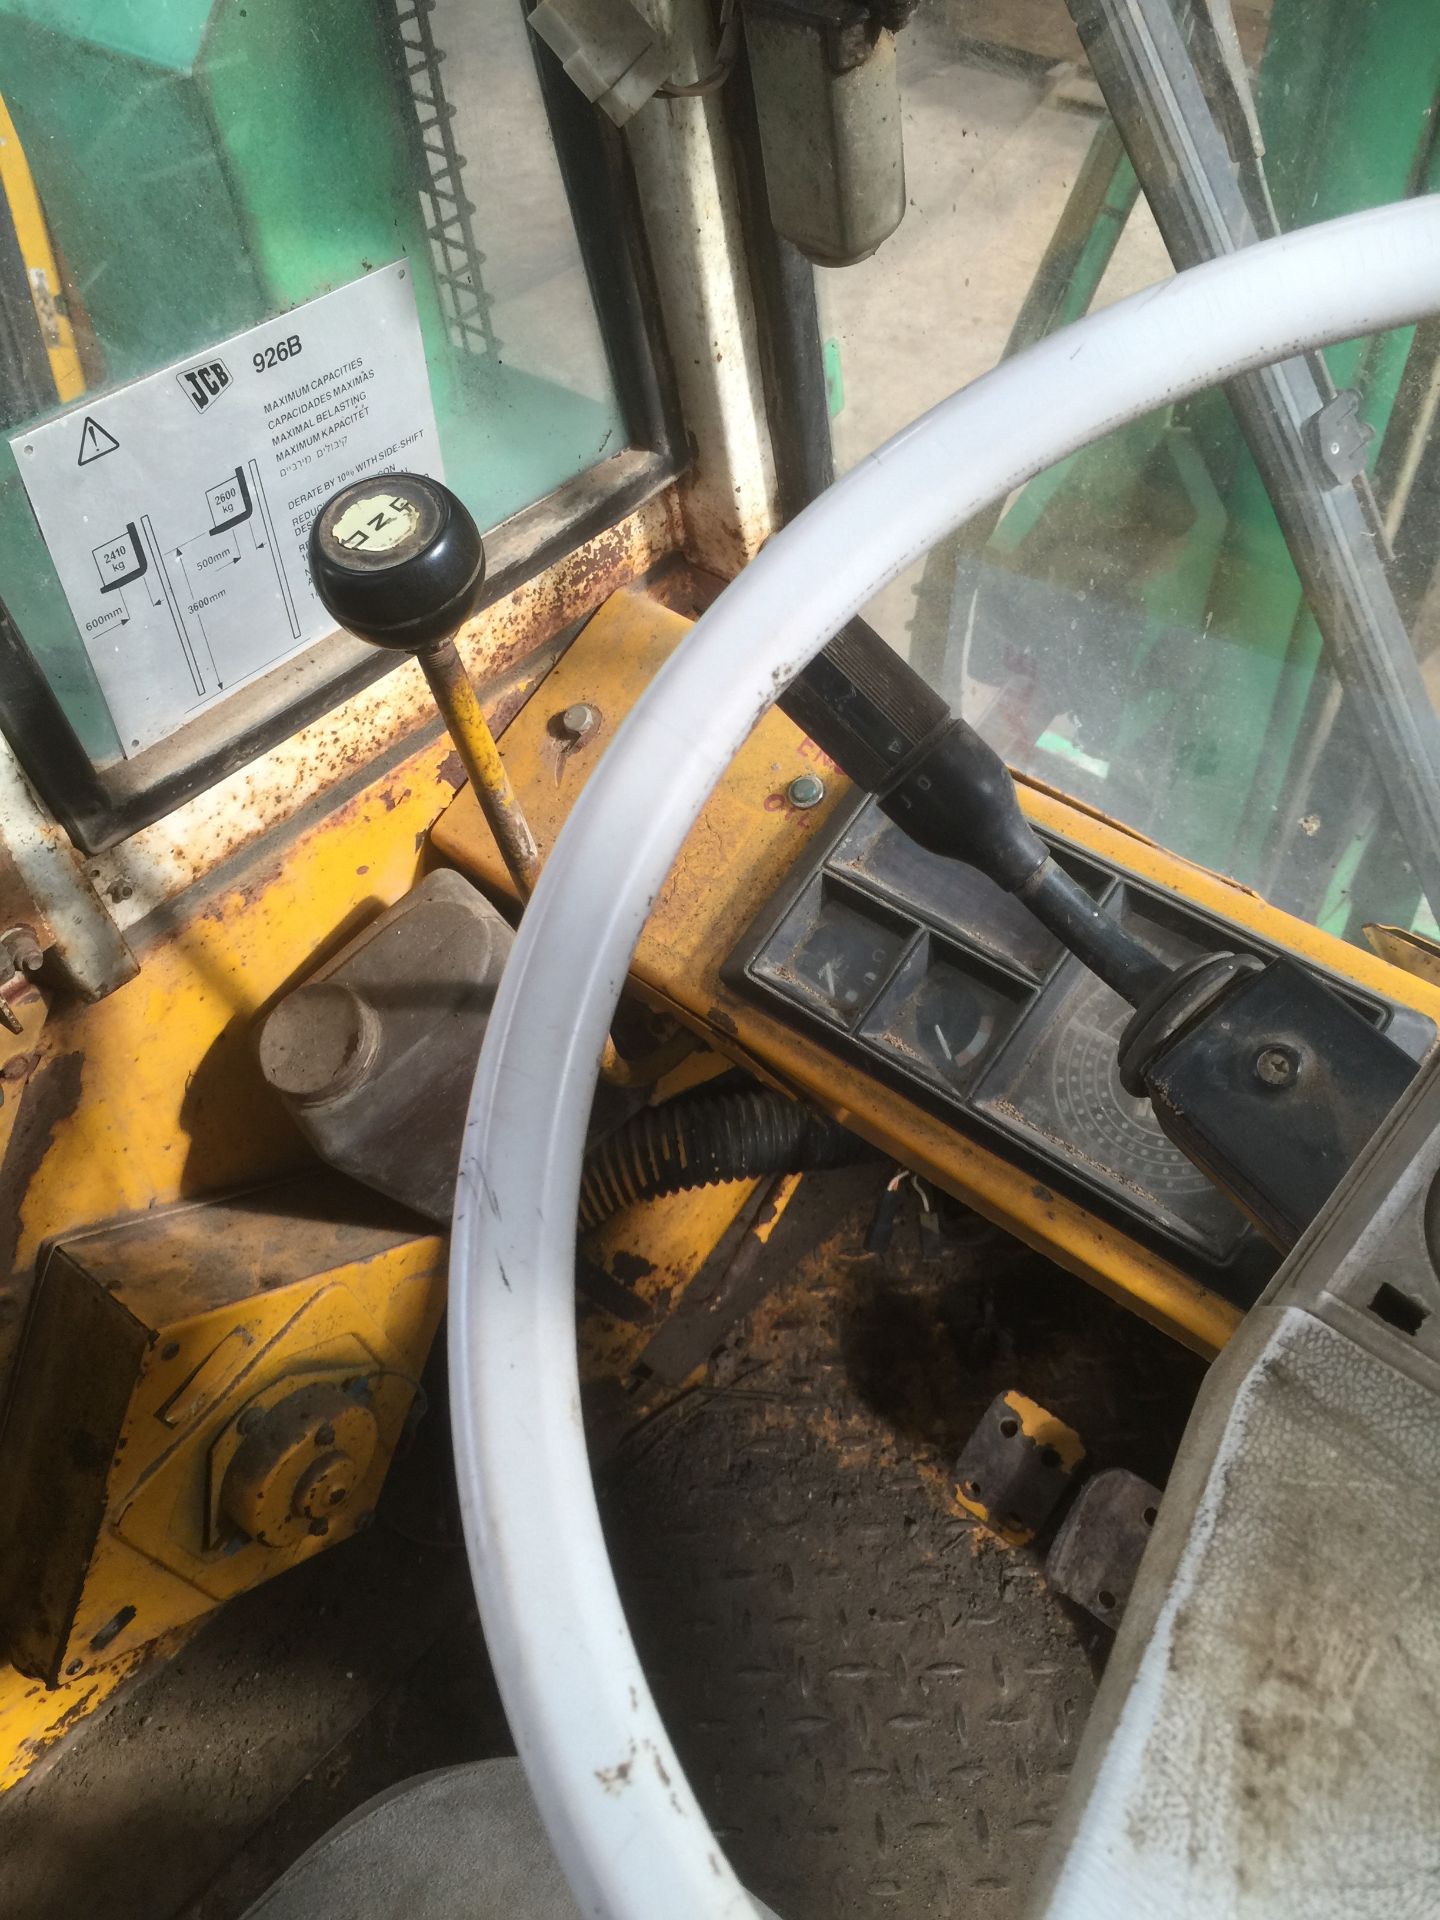 JCB 926 Lift Truck 4282 hours - old but in good working order, starts first time. (extension tines - Image 8 of 11